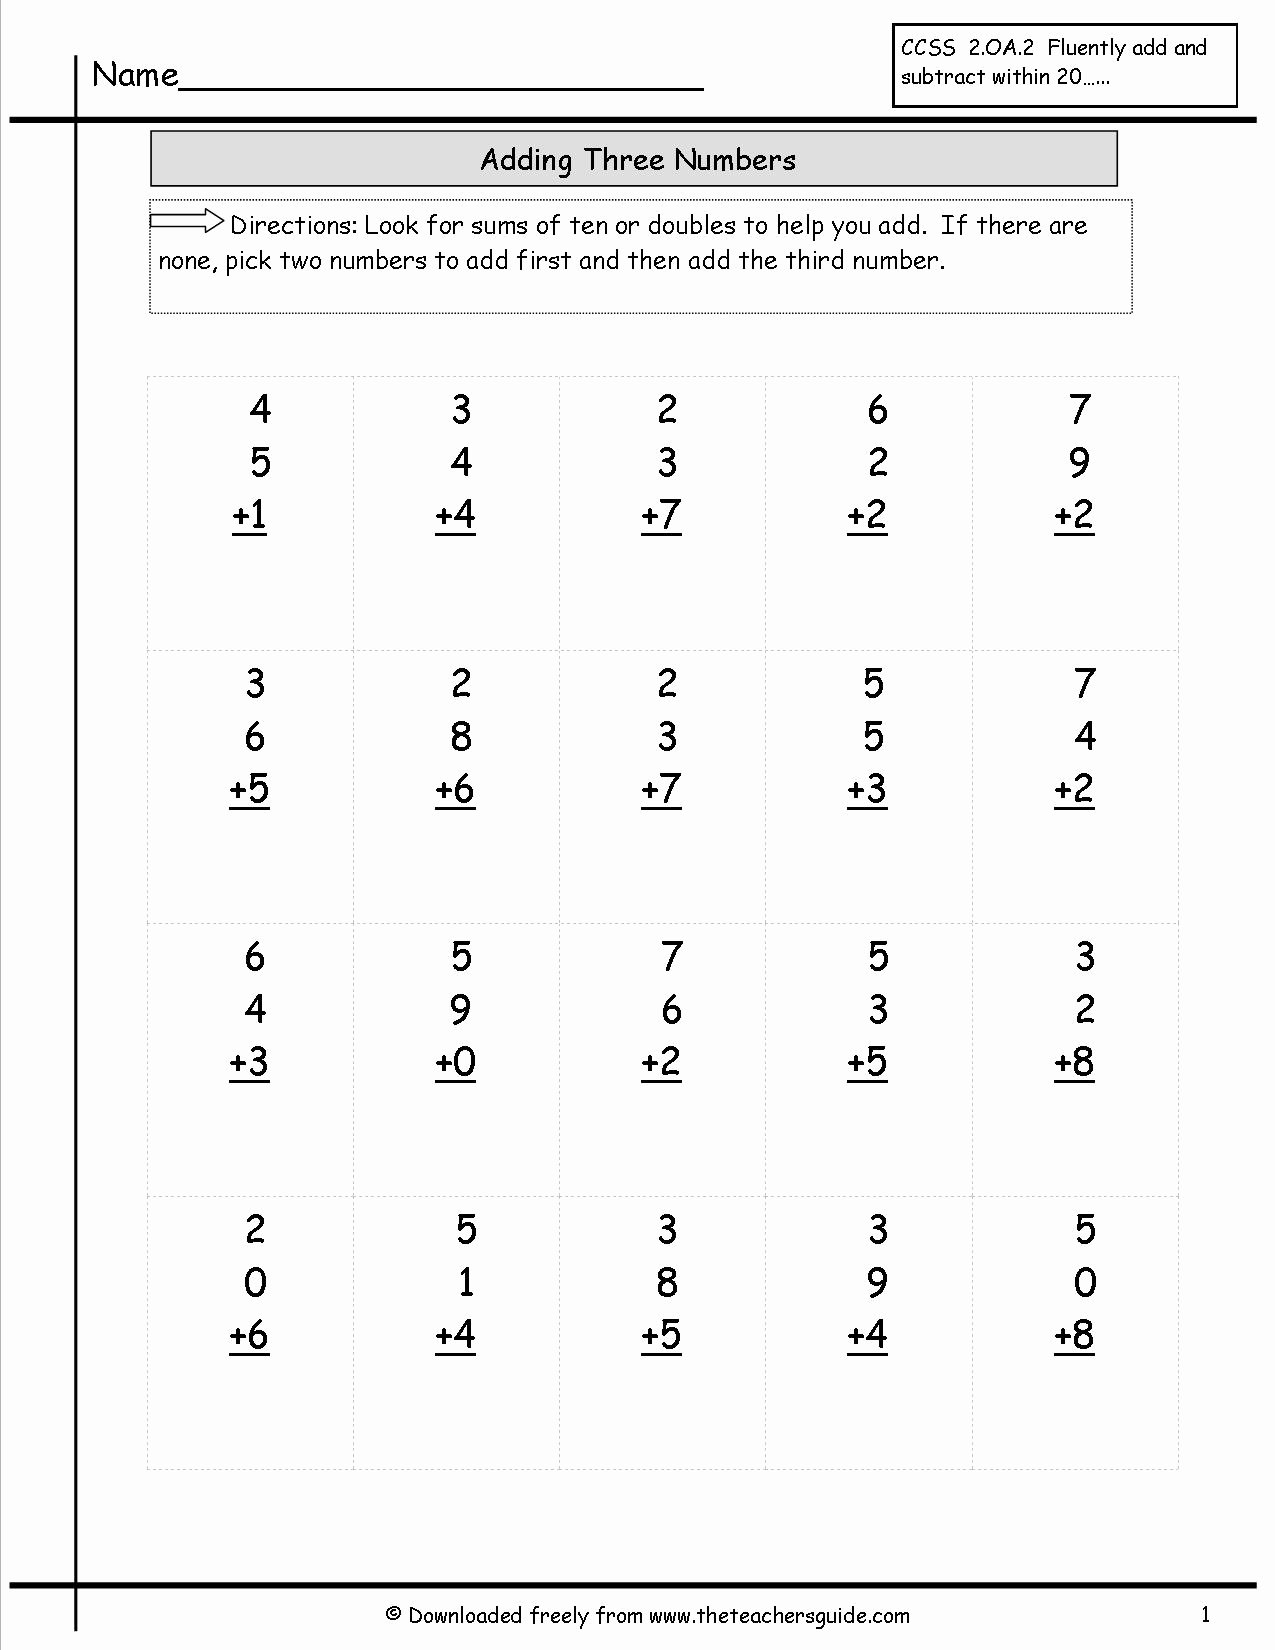 Adding Three Numbers Worksheet Best Of Free Math Printouts From the Teacher S Guide